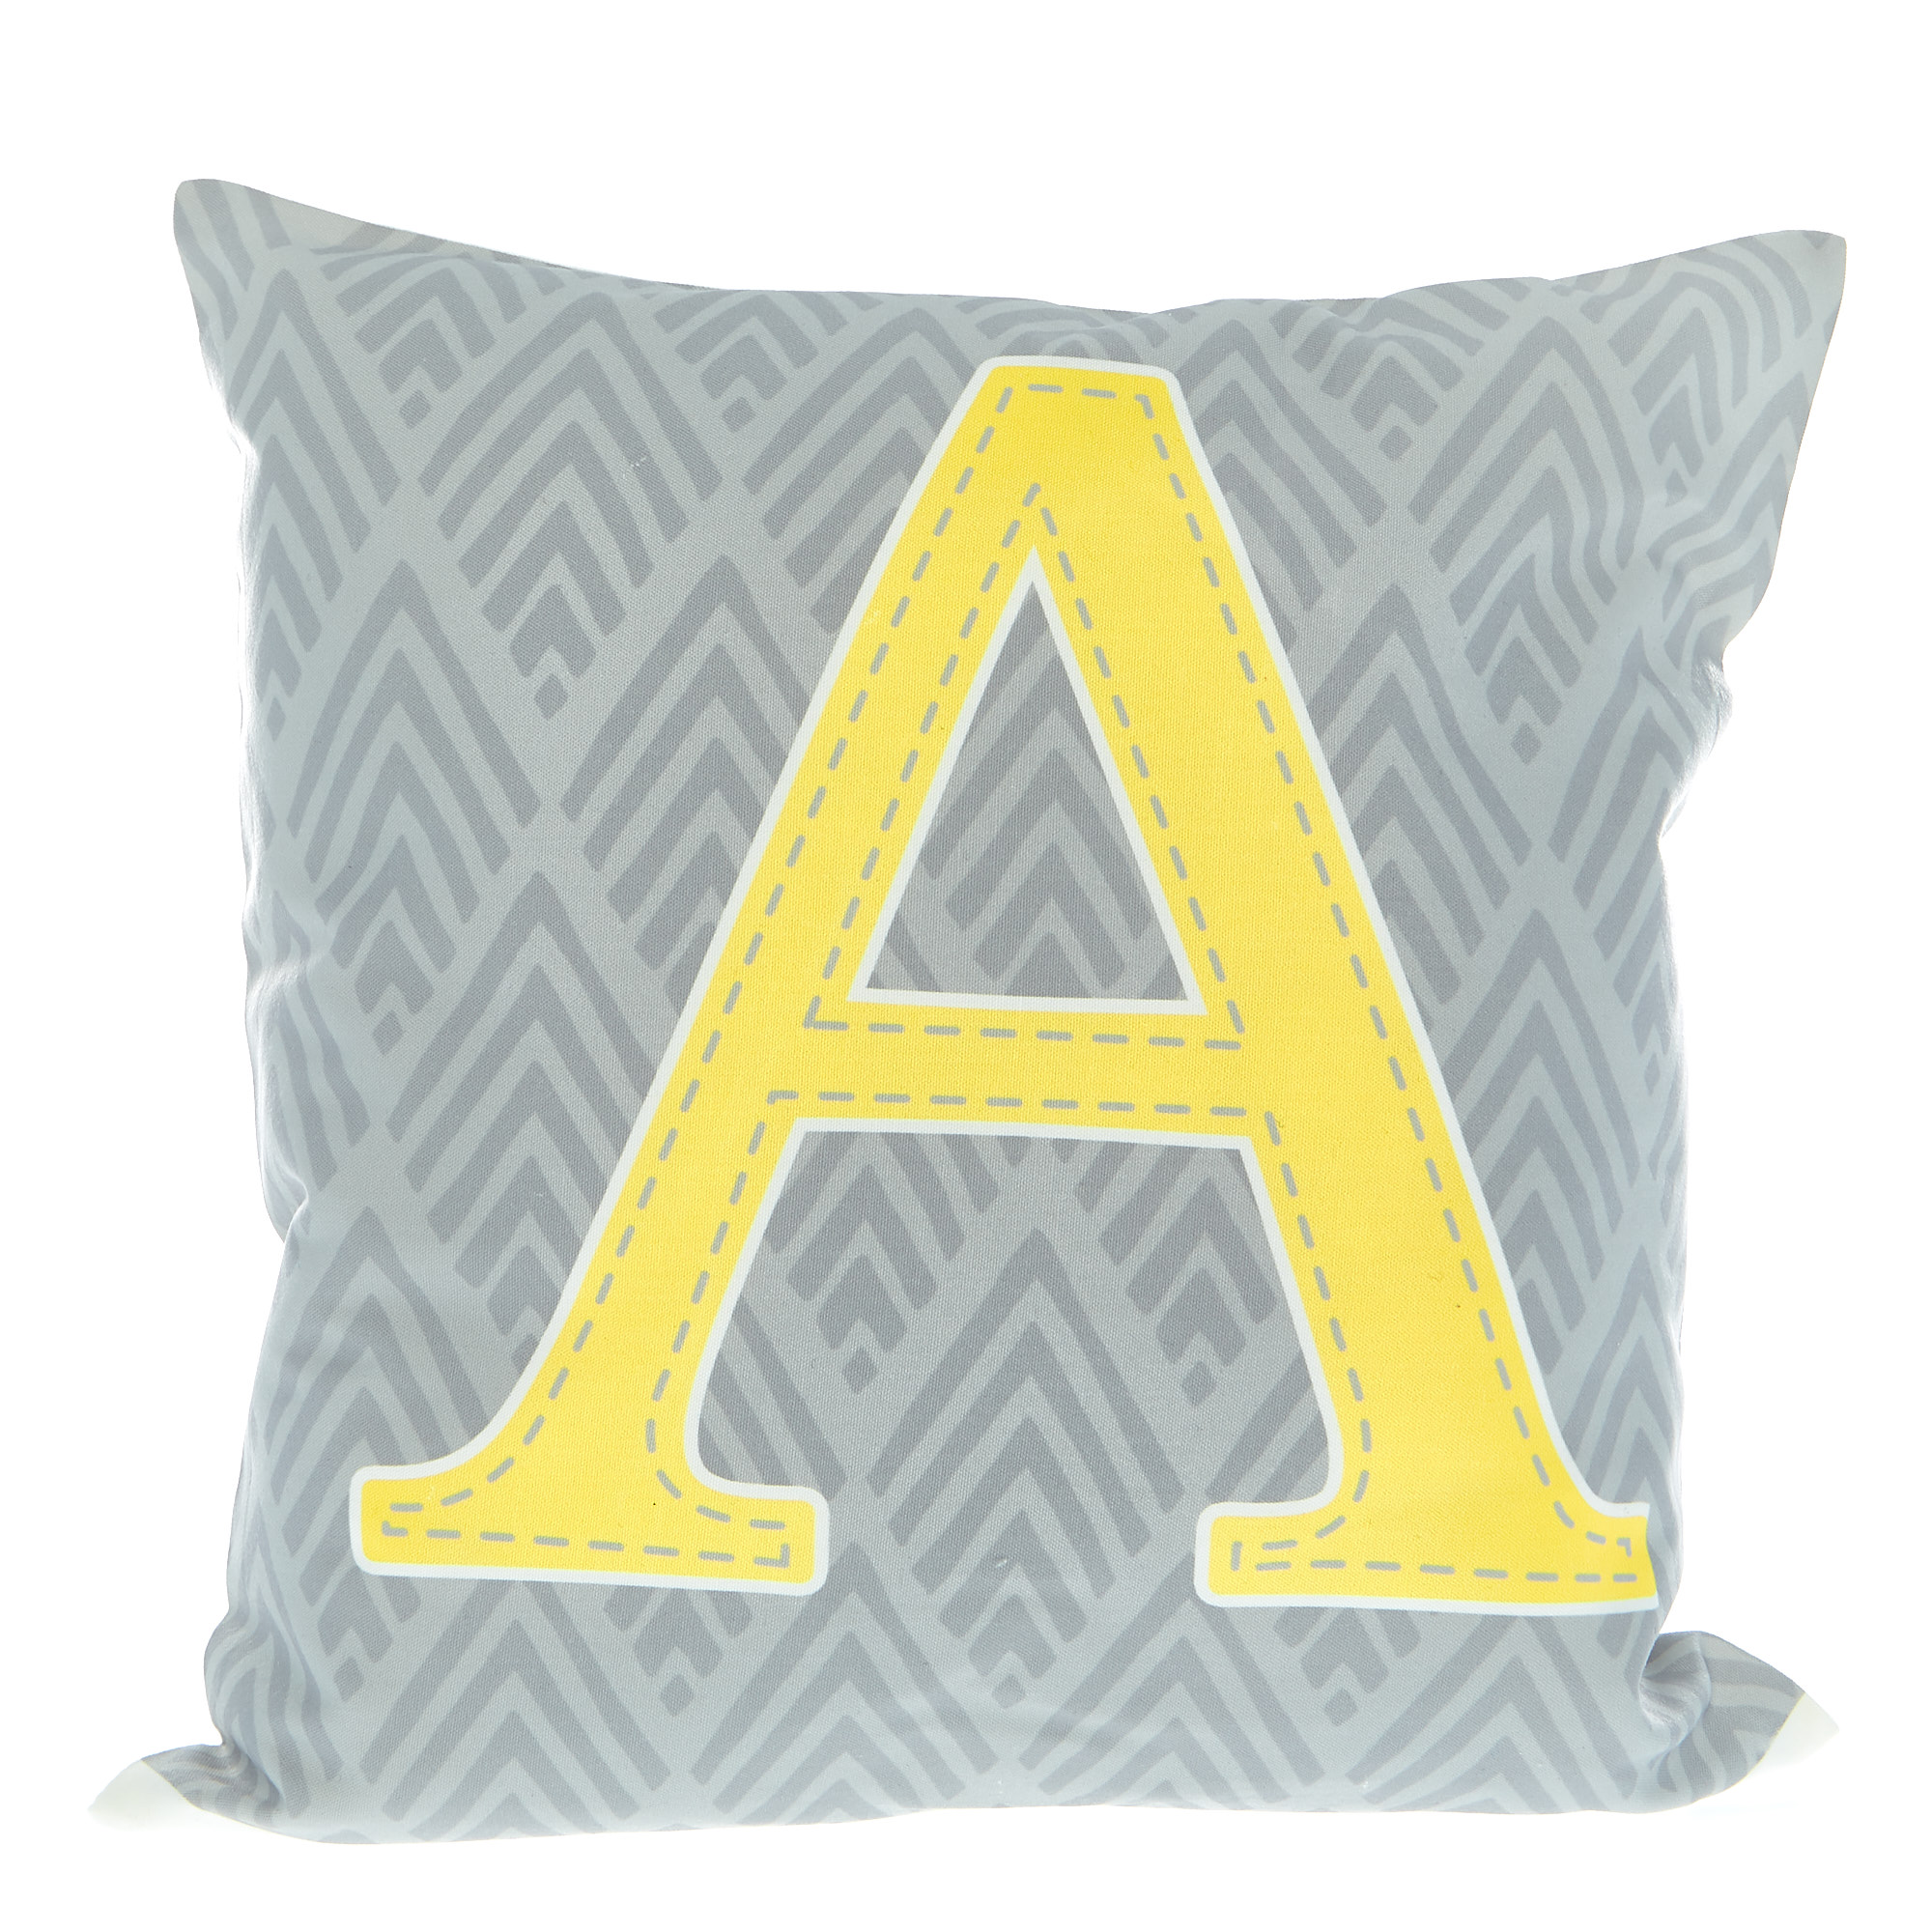 Personalised Cushion - Baby Initial 